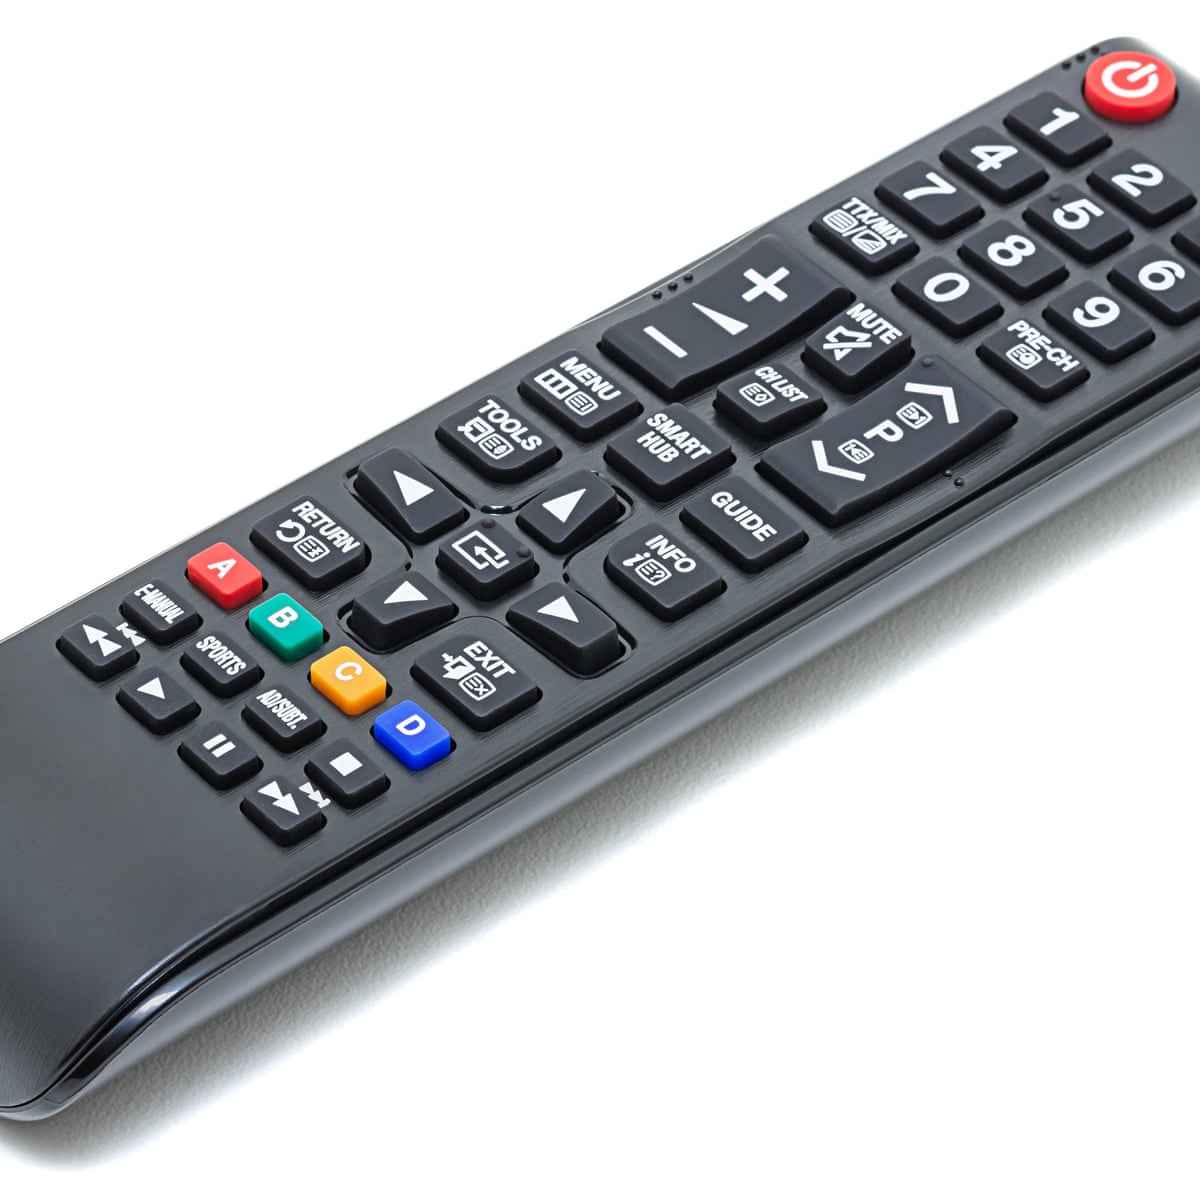 Losing control: is this the death of the TV remote?, Television